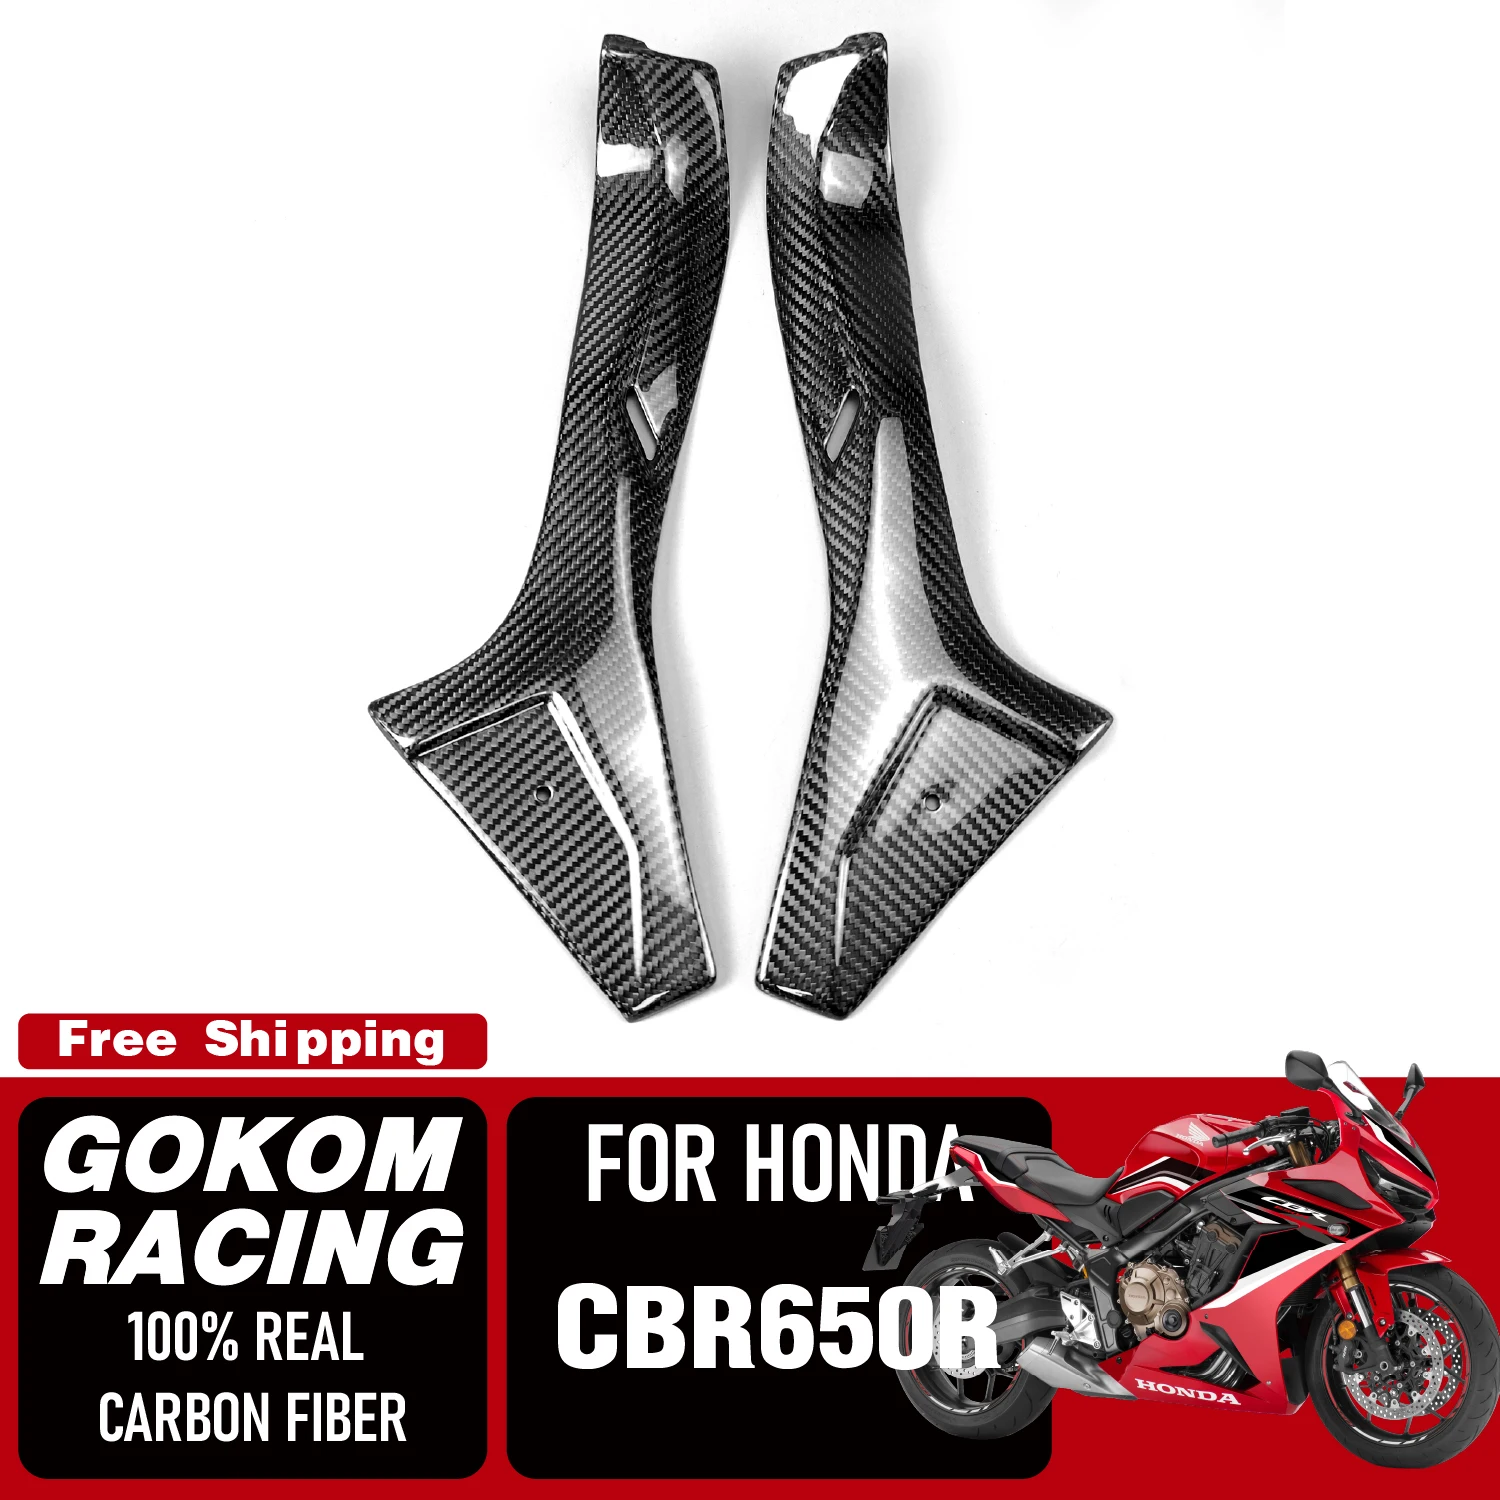 

Gokom Racing For HONDA CBR650R Front side panel GUARD COVER COWLING FAIRING 100% REAL CARBON FIBER MOTORCYCLE ACCESSORIES